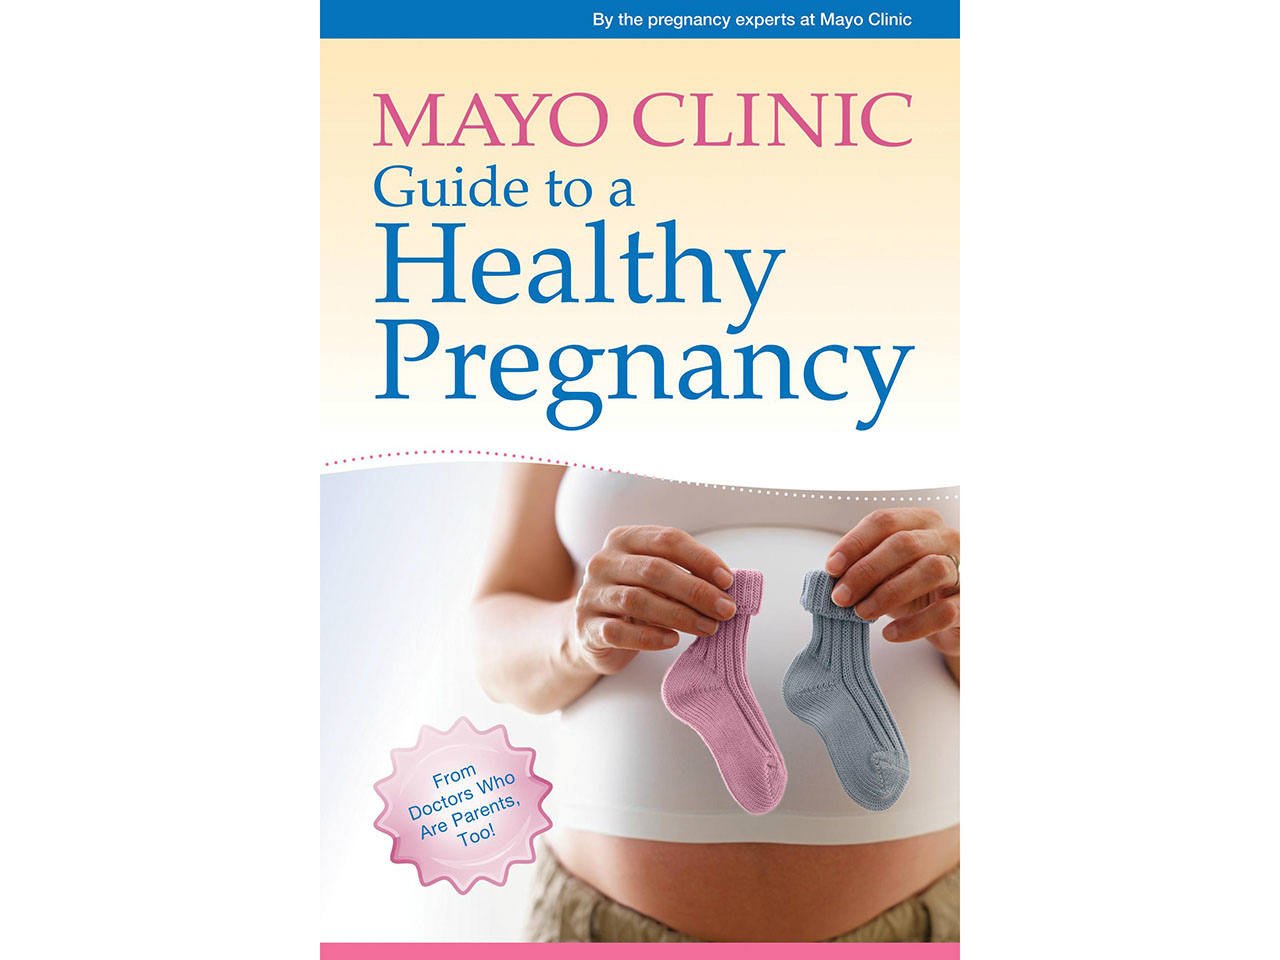 Cover of pregnancy book Mayo Clinic Guide to a Healthy Pregnancy